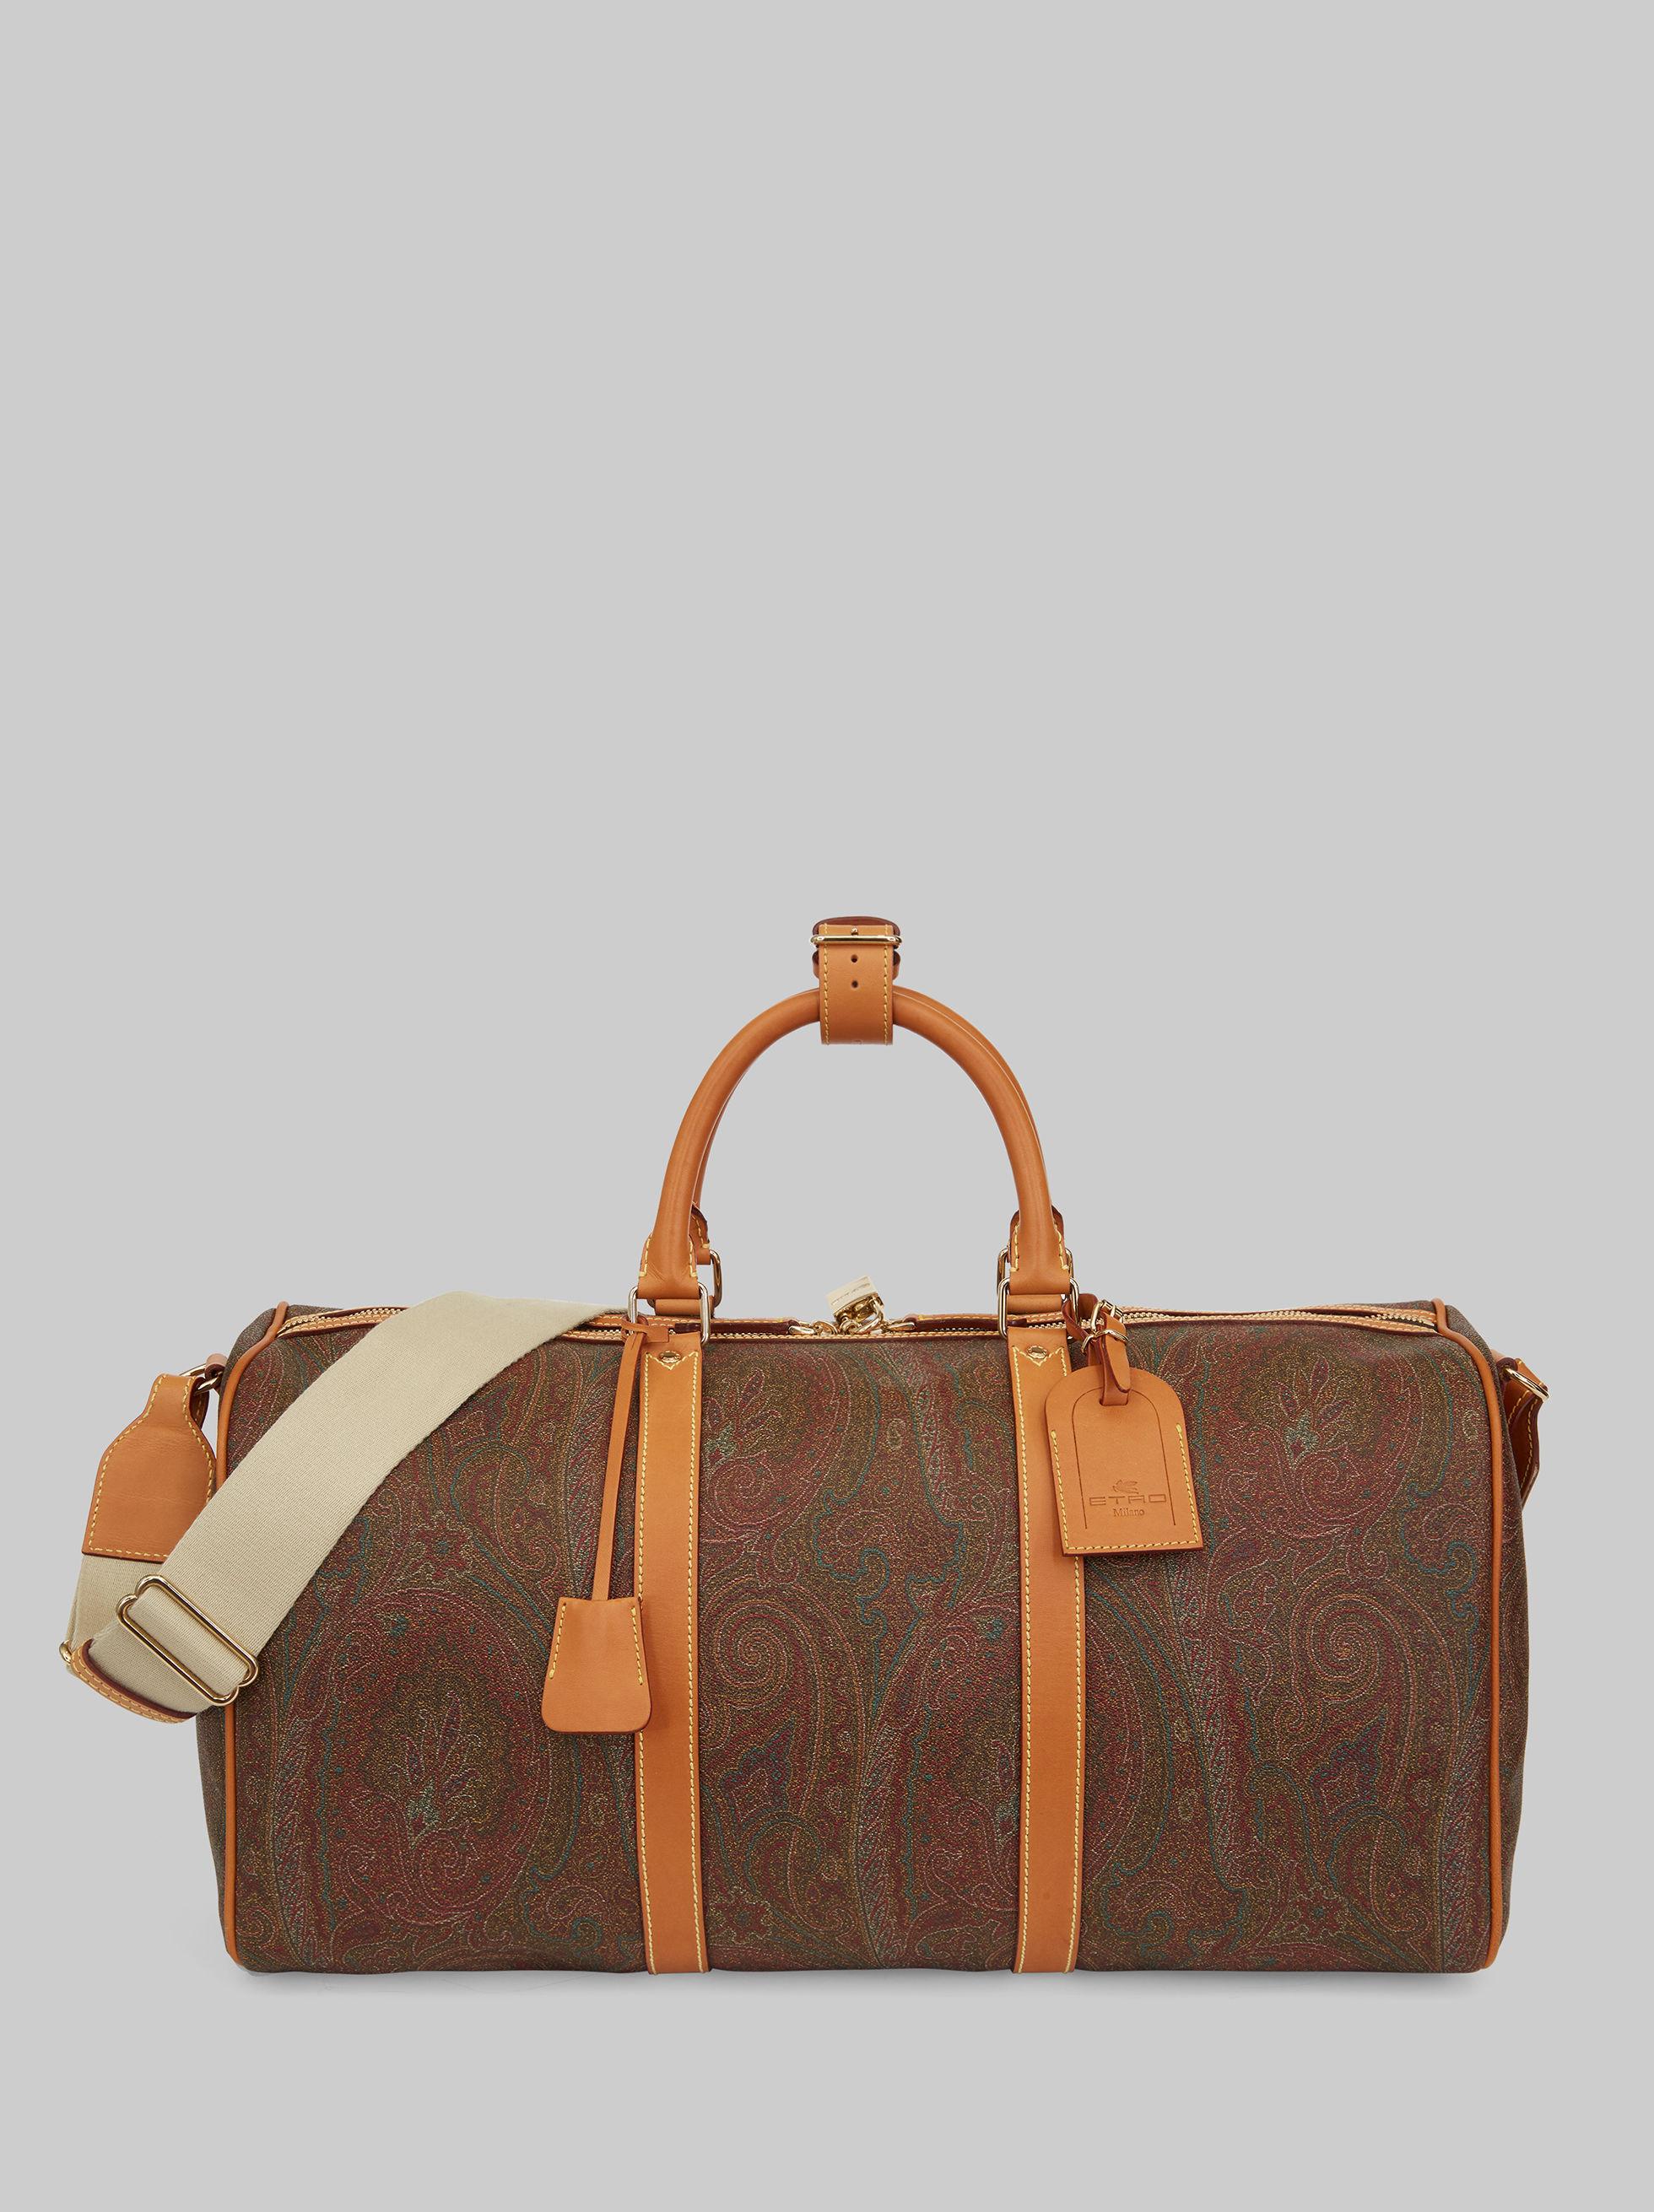 Etro Canvas Paisley Travel Bag With Crossbody Strap in Brown for Men - Lyst